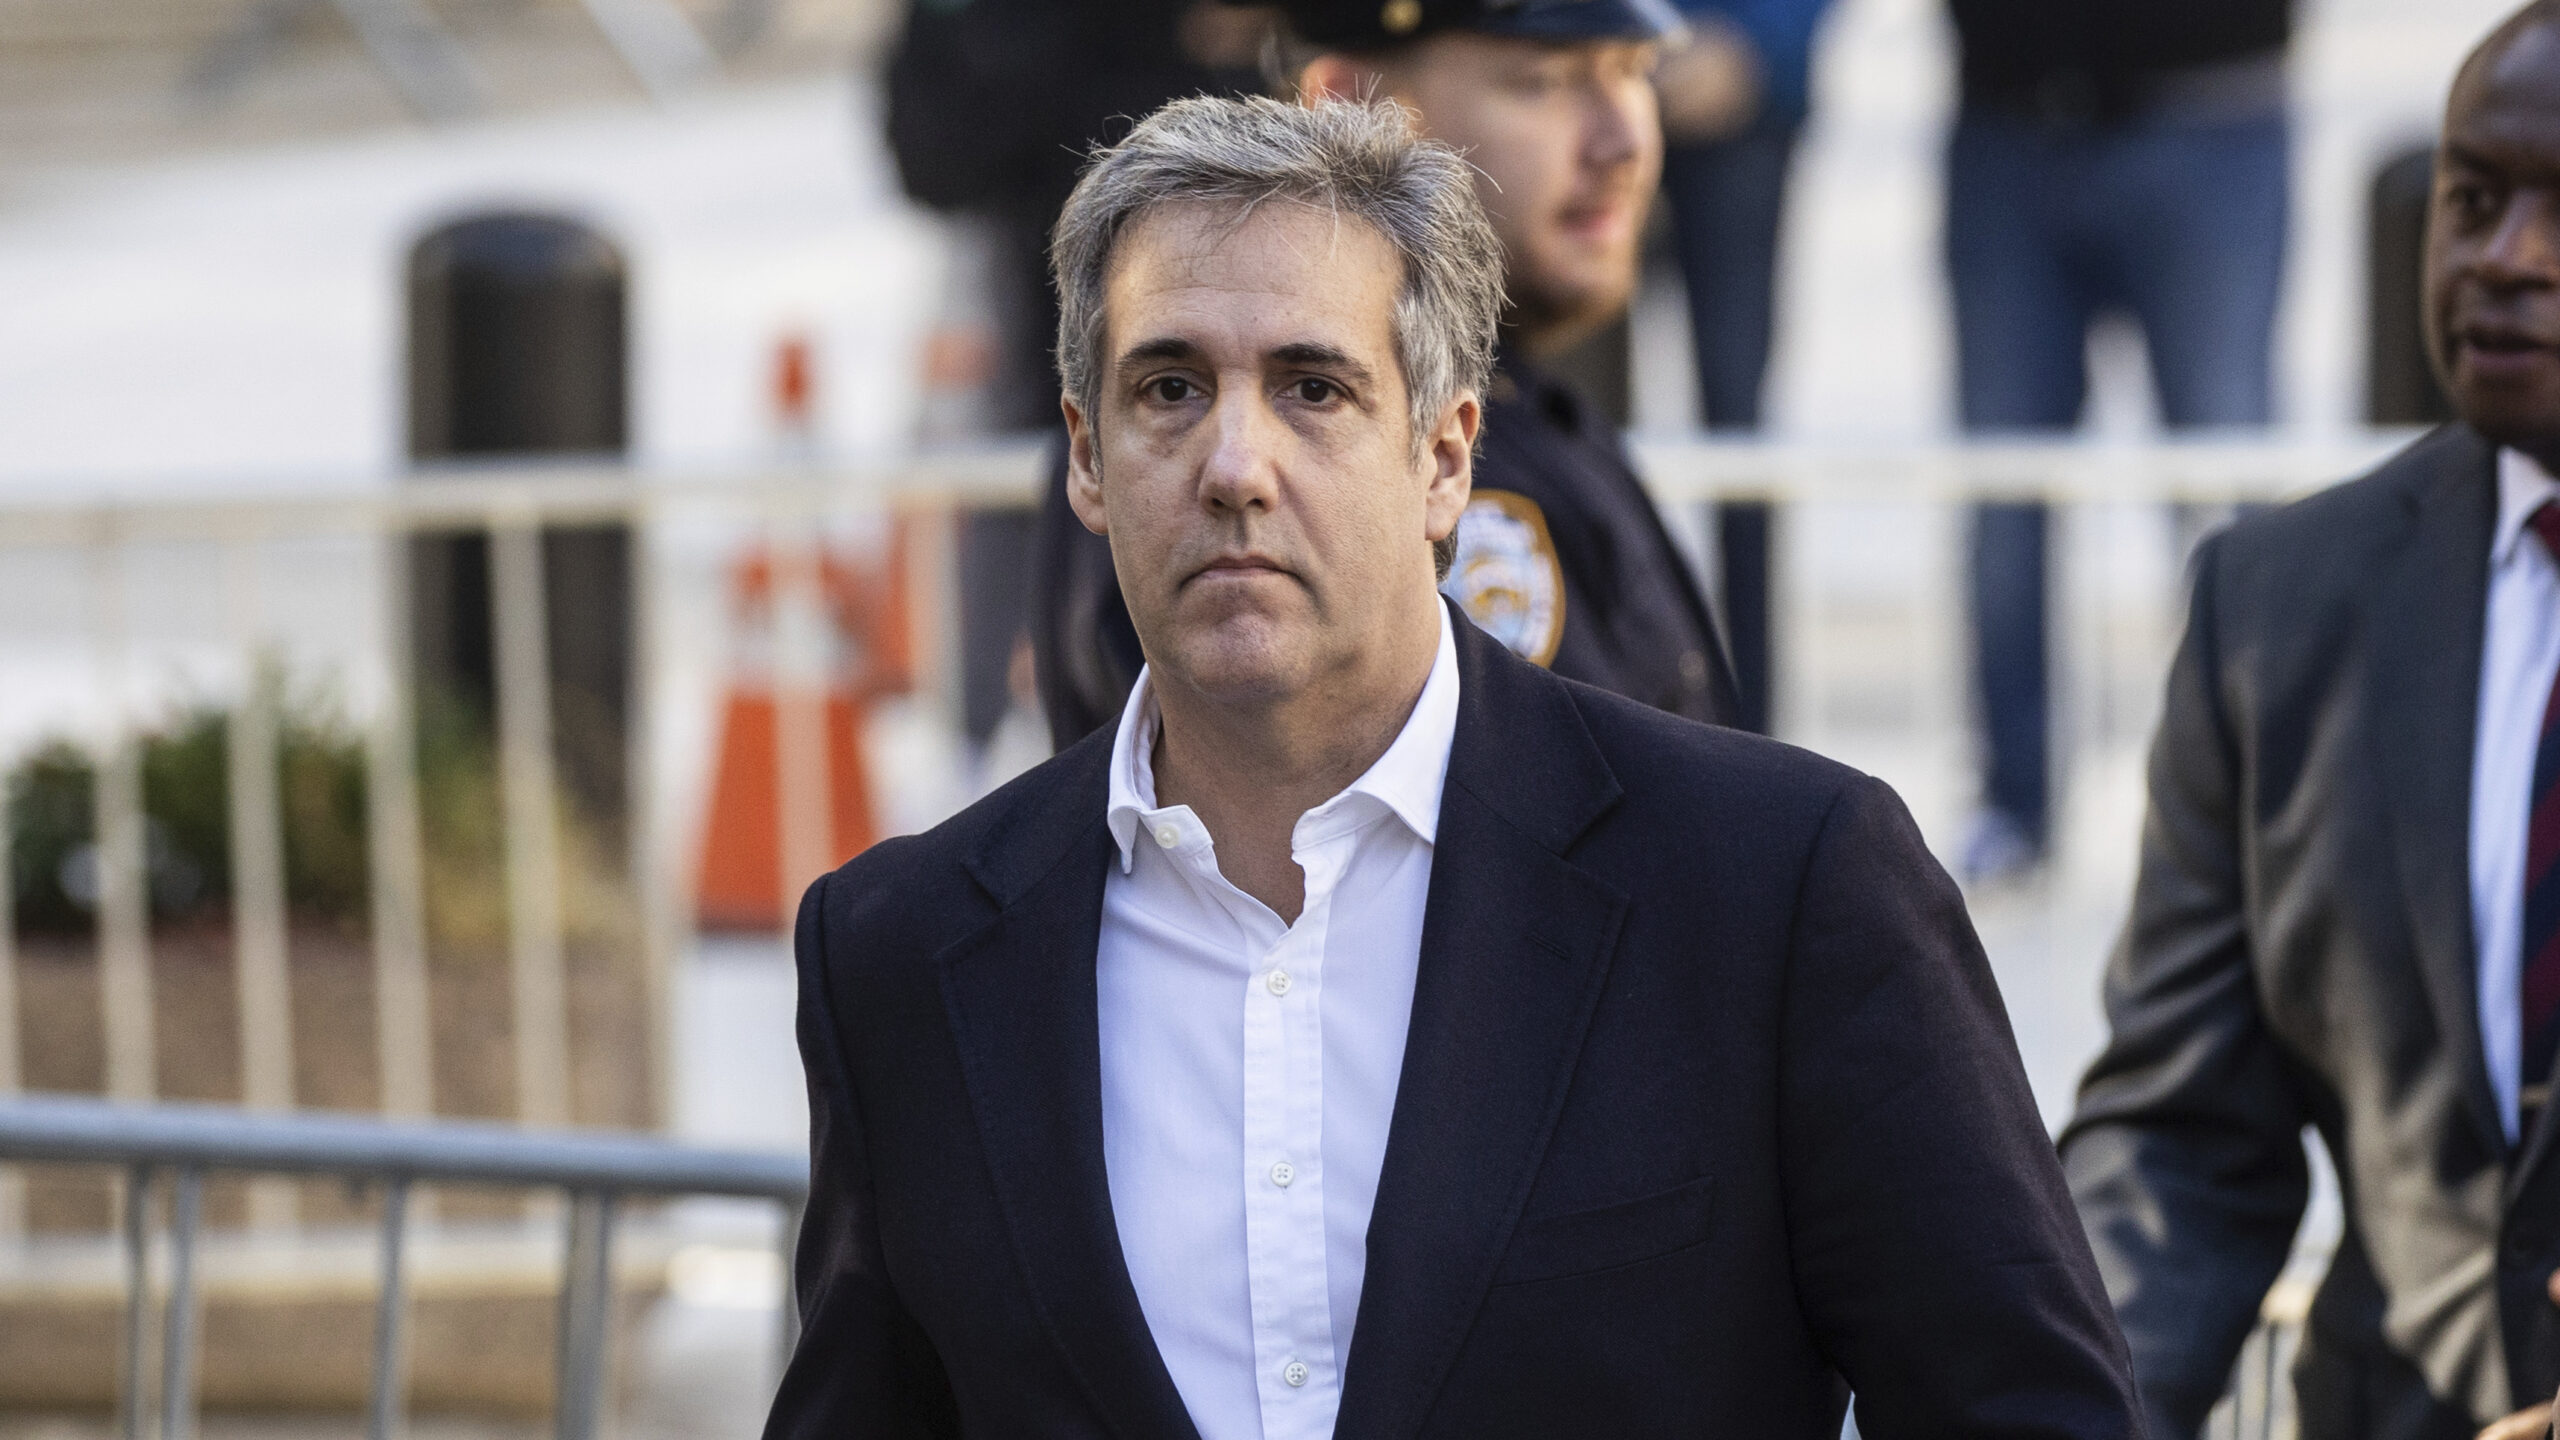 Michael Cohen arrives at New York Supreme Court for former President Donald Trump's civil business fraud trial on Oct.